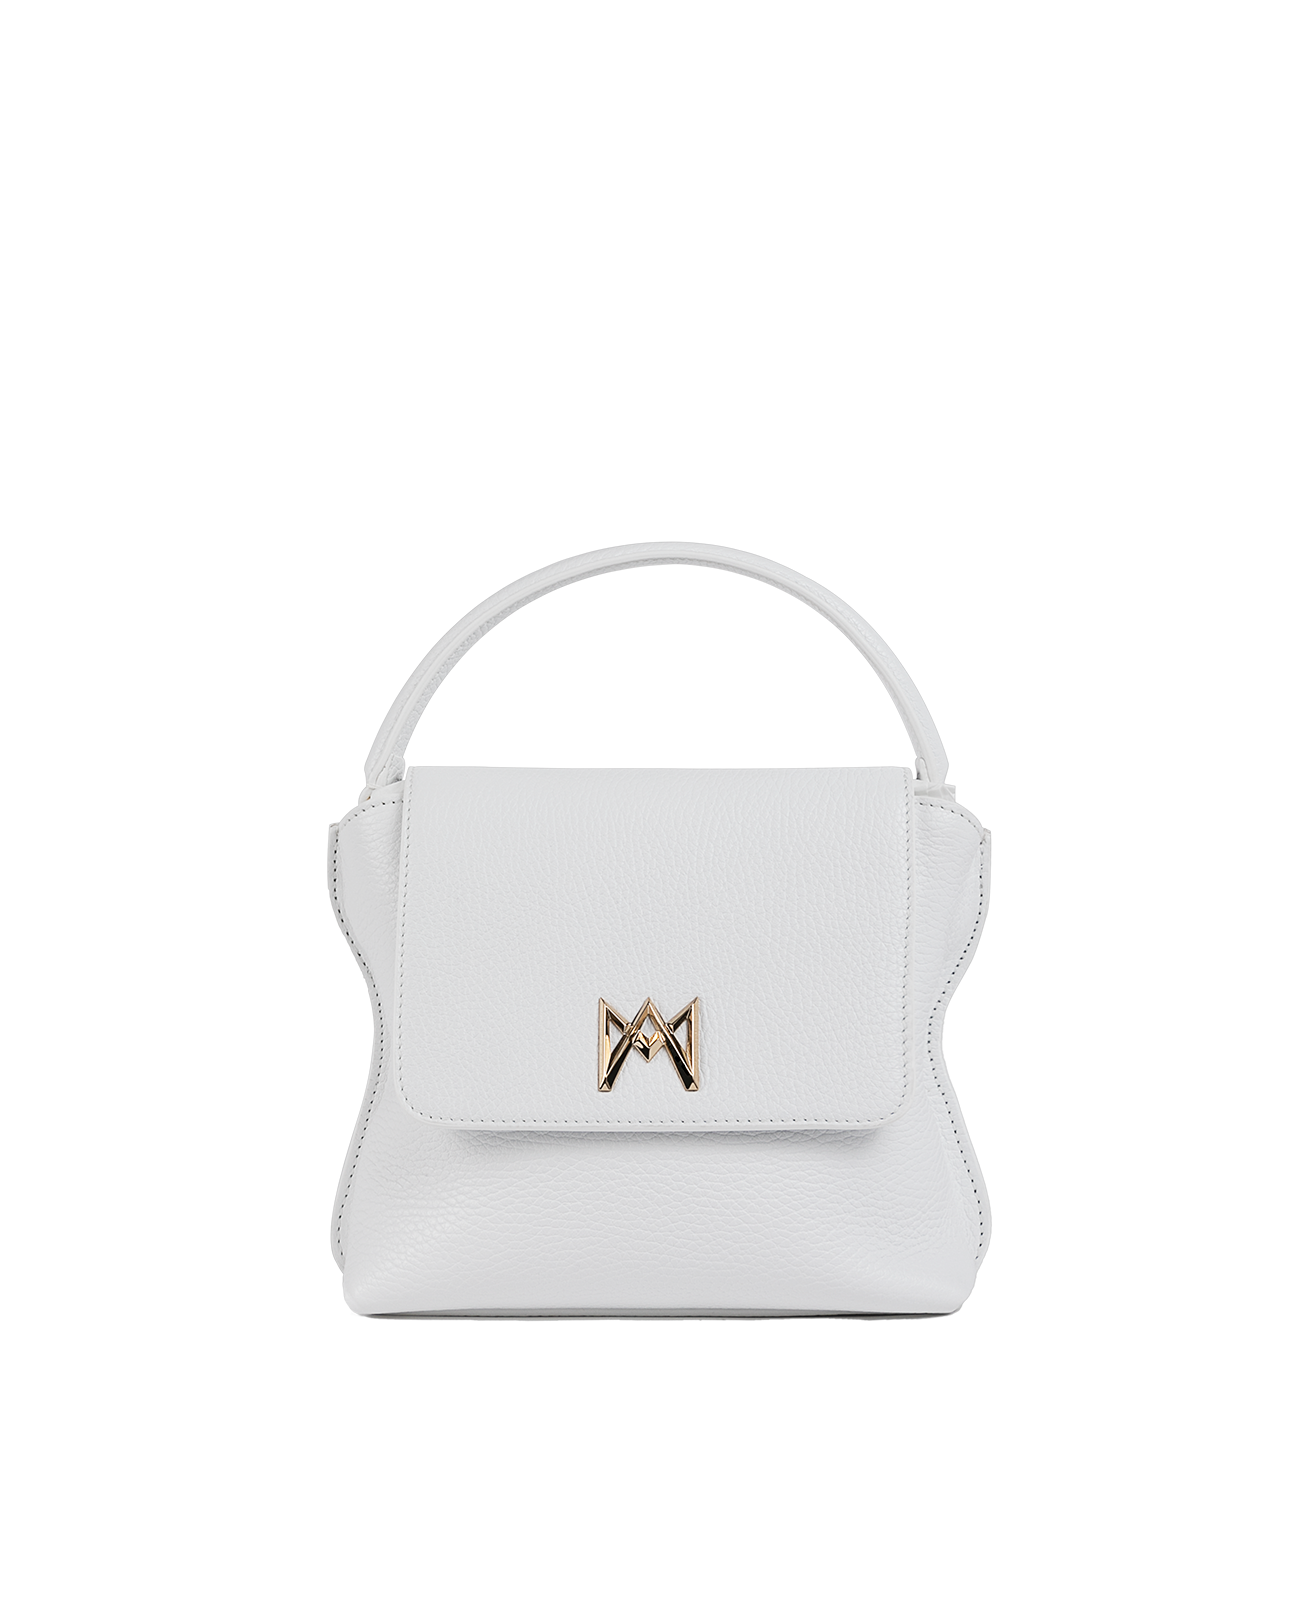 Cross-body bag in Italian full-grain leather, semi-aniline calf Italian leather with detachable shoulder strap.Three compartments, zip pocket in the back compartment. Magnetic flap closure with logo. Color: White. Size:Medium